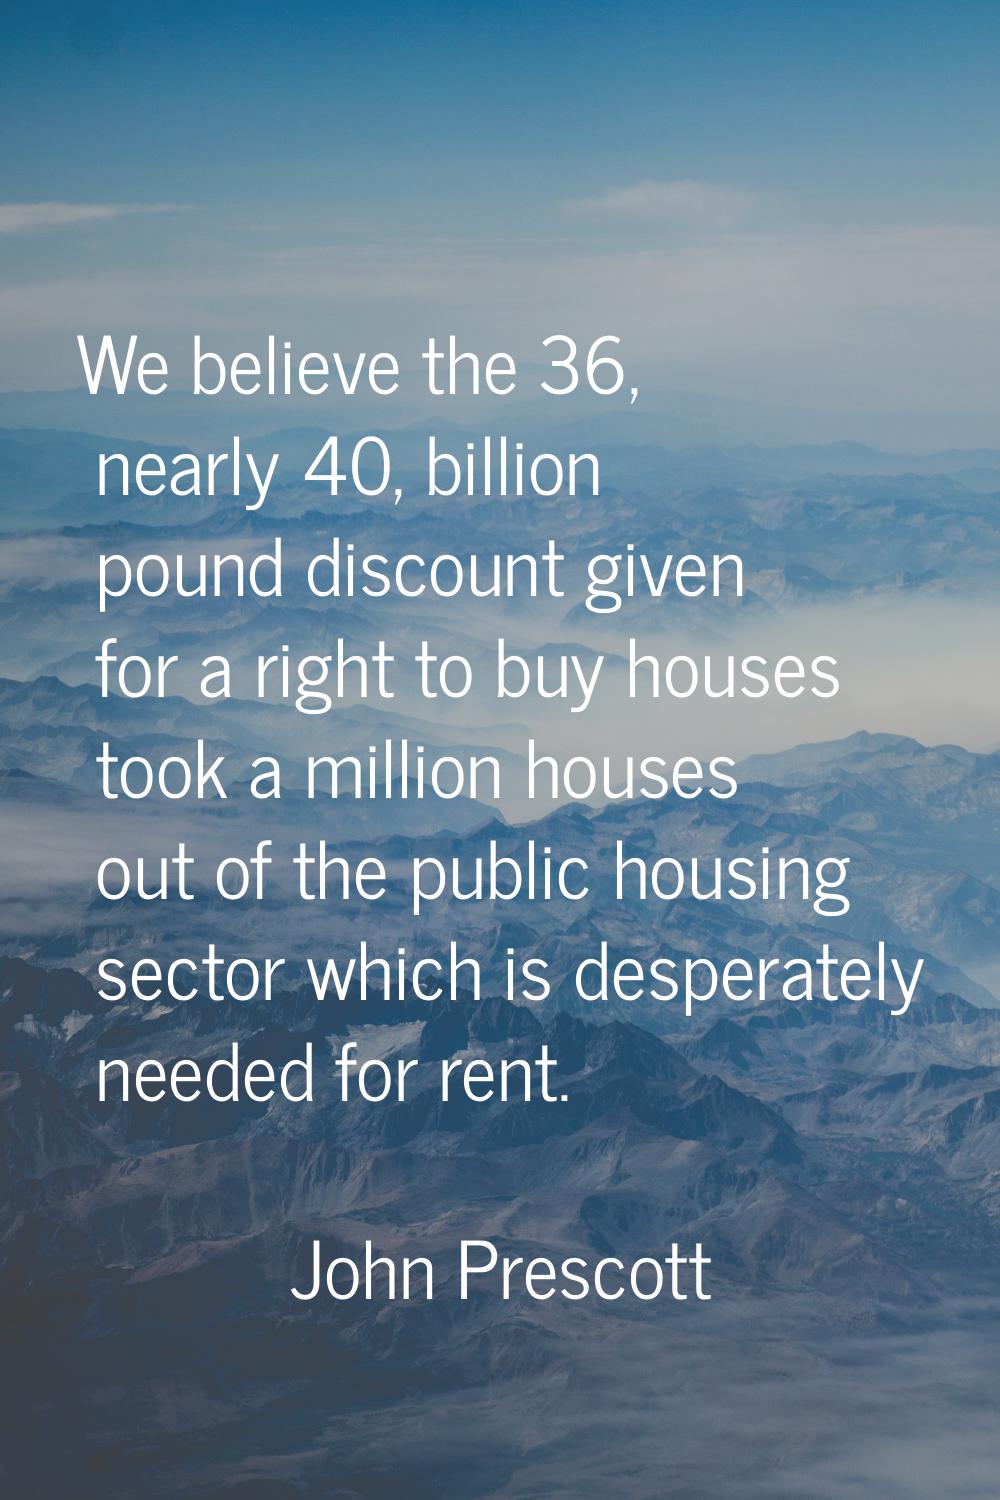 We believe the 36, nearly 40, billion pound discount given for a right to buy houses took a million